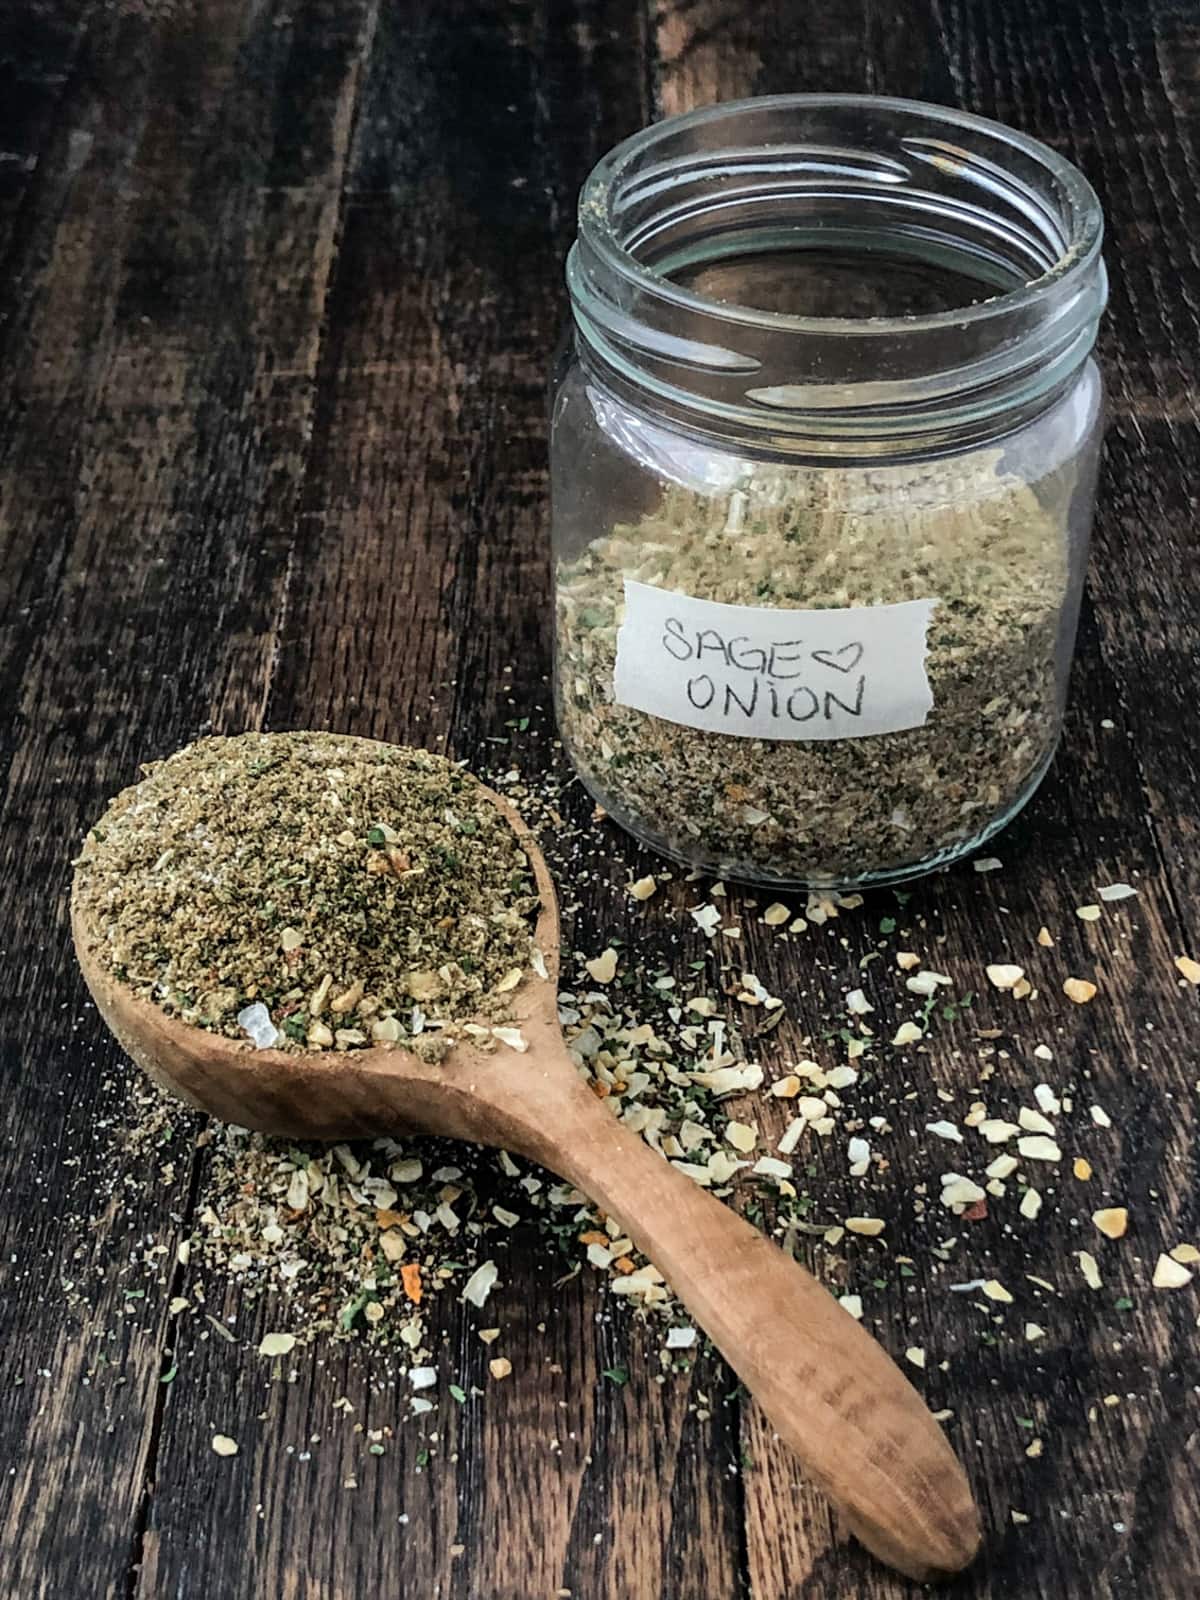 Mixture of sage and poultry seasoning spices in a jar and large wooden spoon.